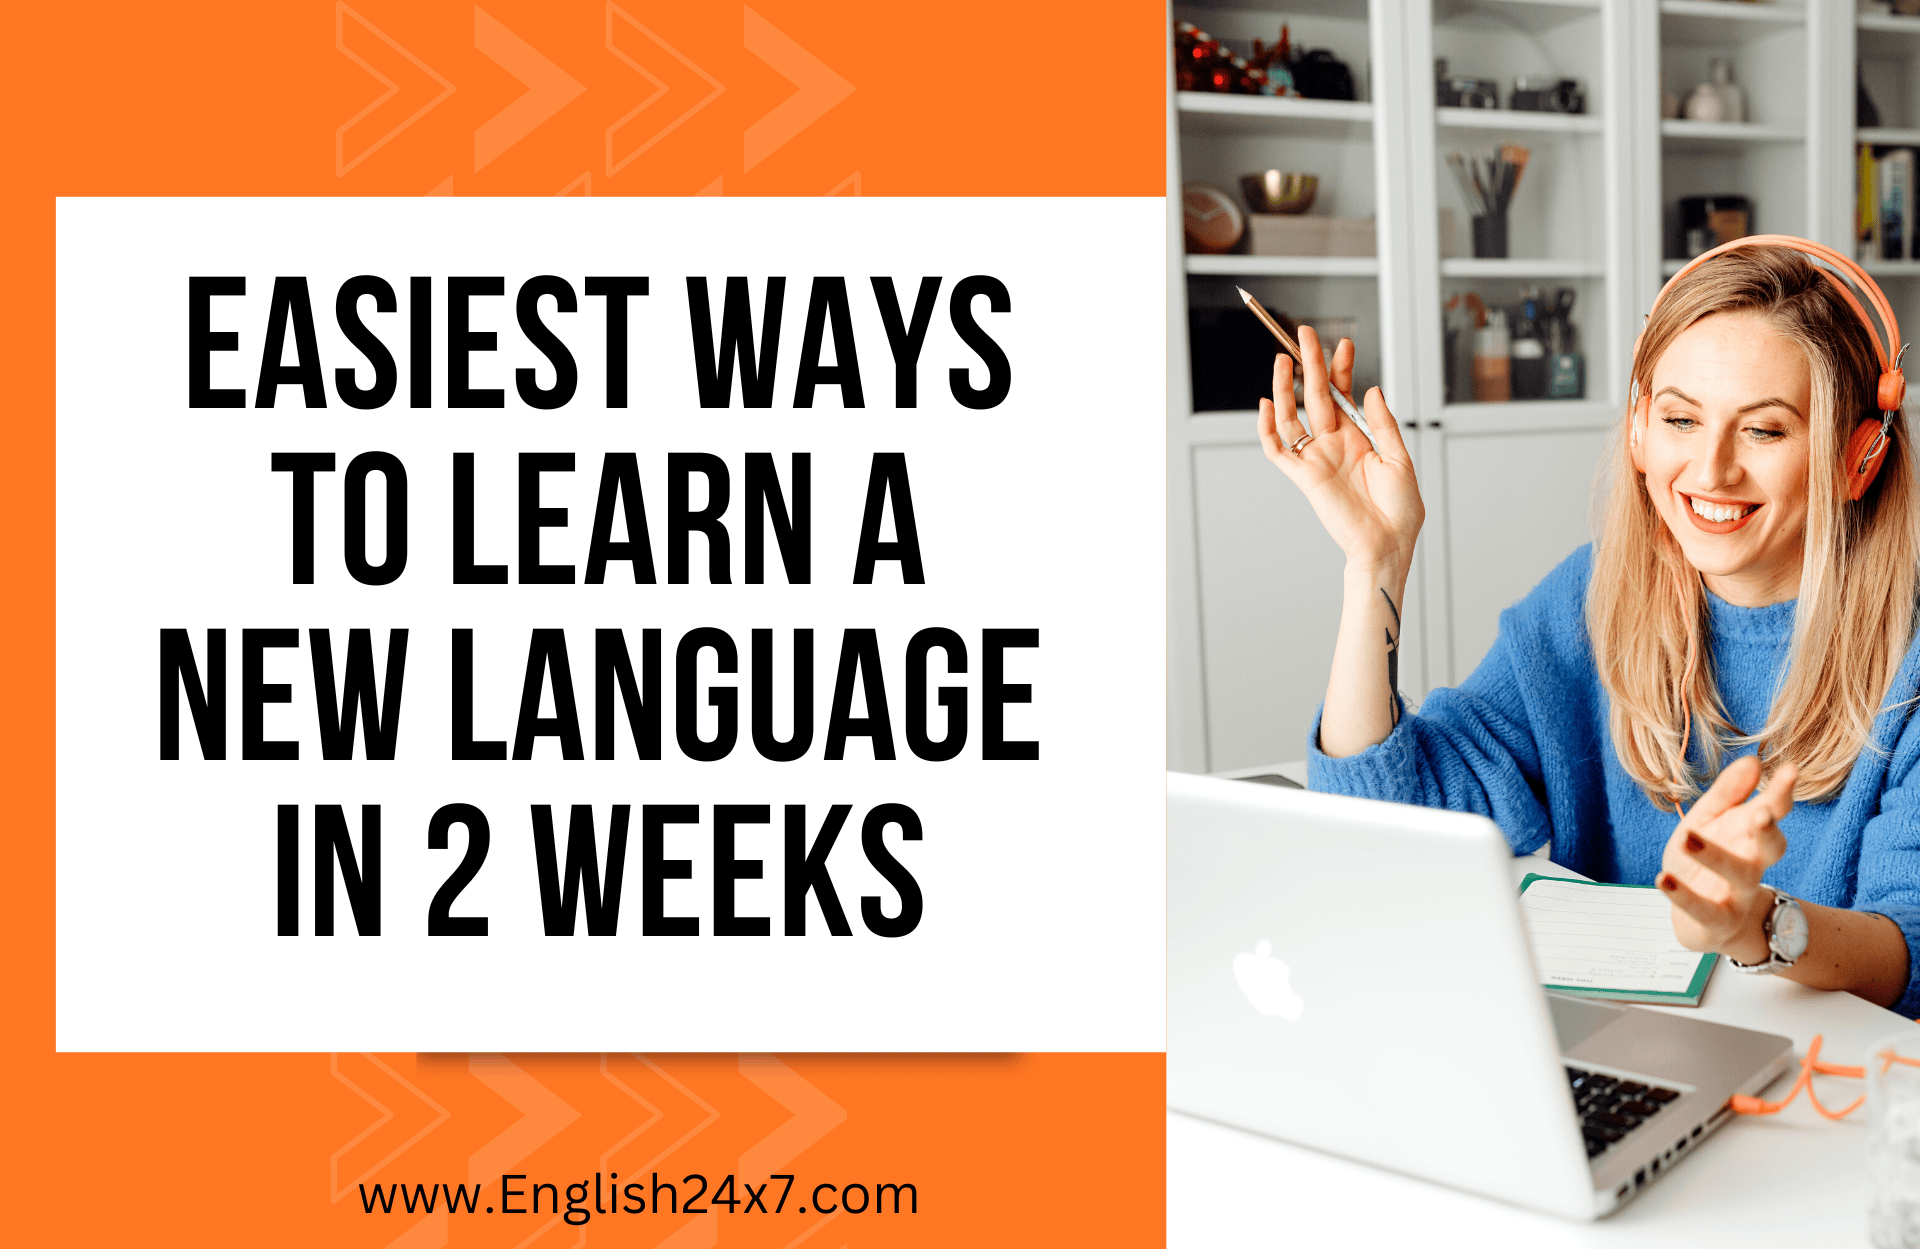 Easiest Ways to Learn a New Language in 2 Weeks